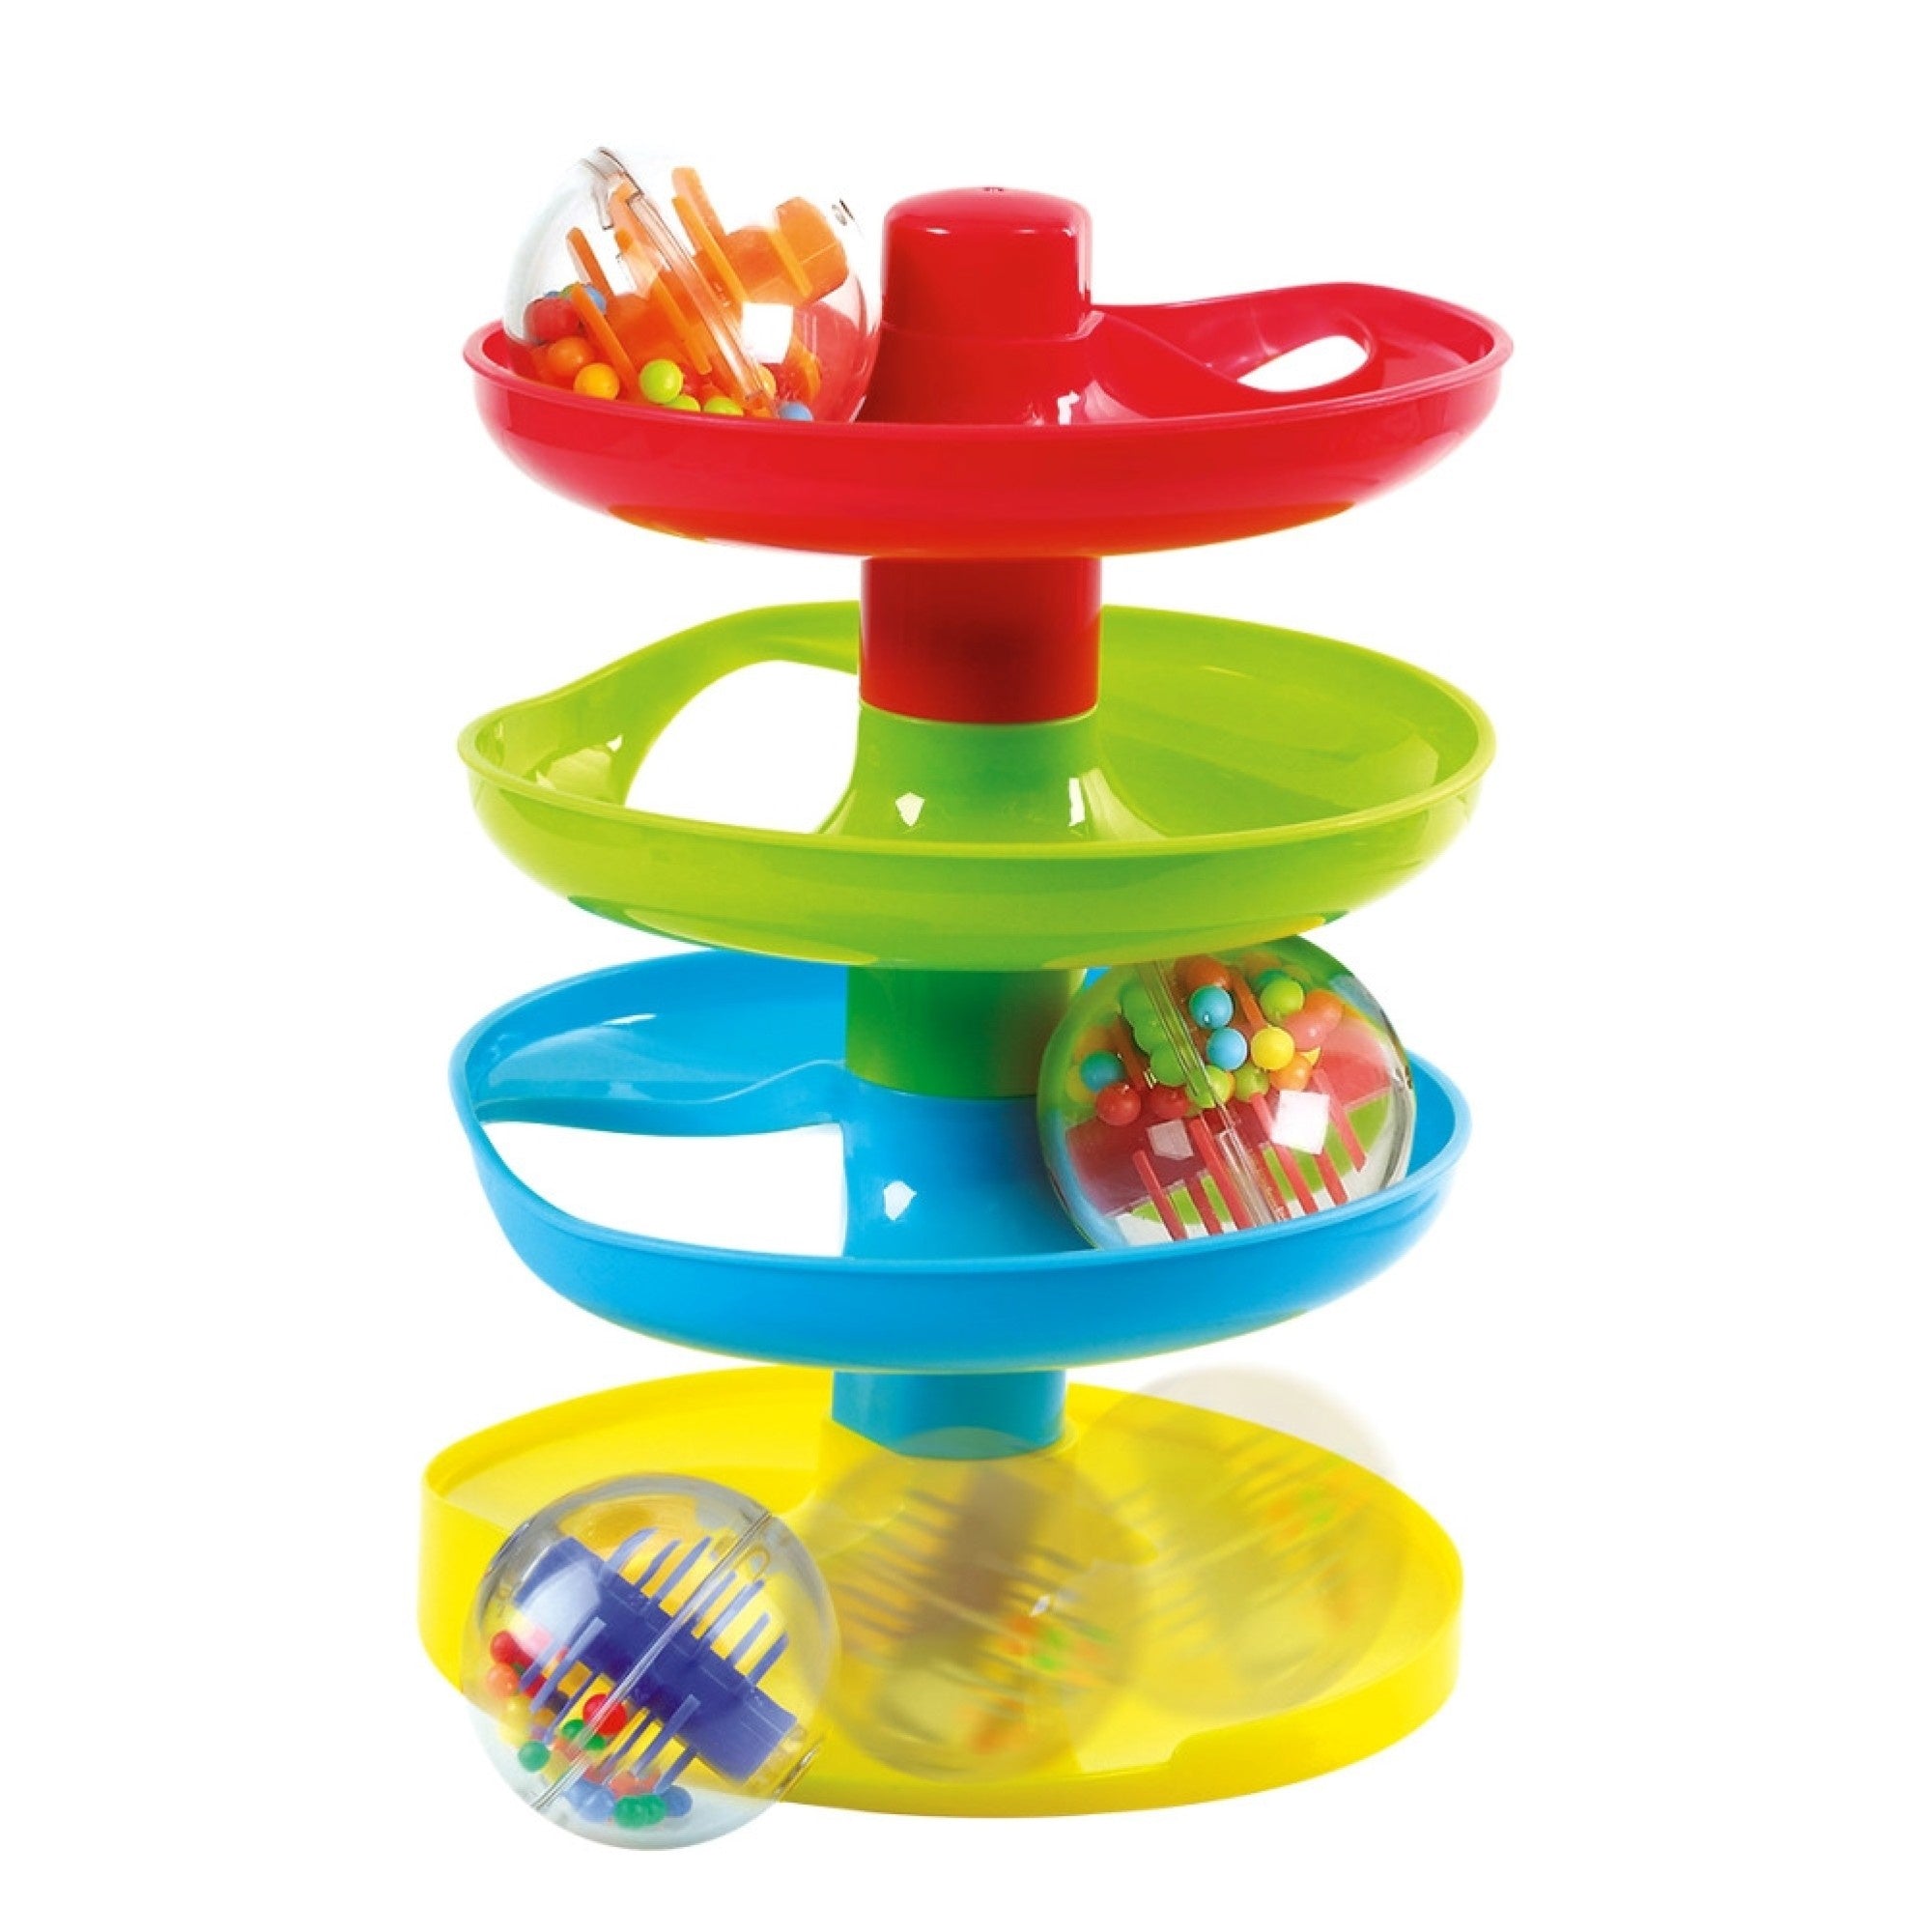 Playgo Busy Ball Tower